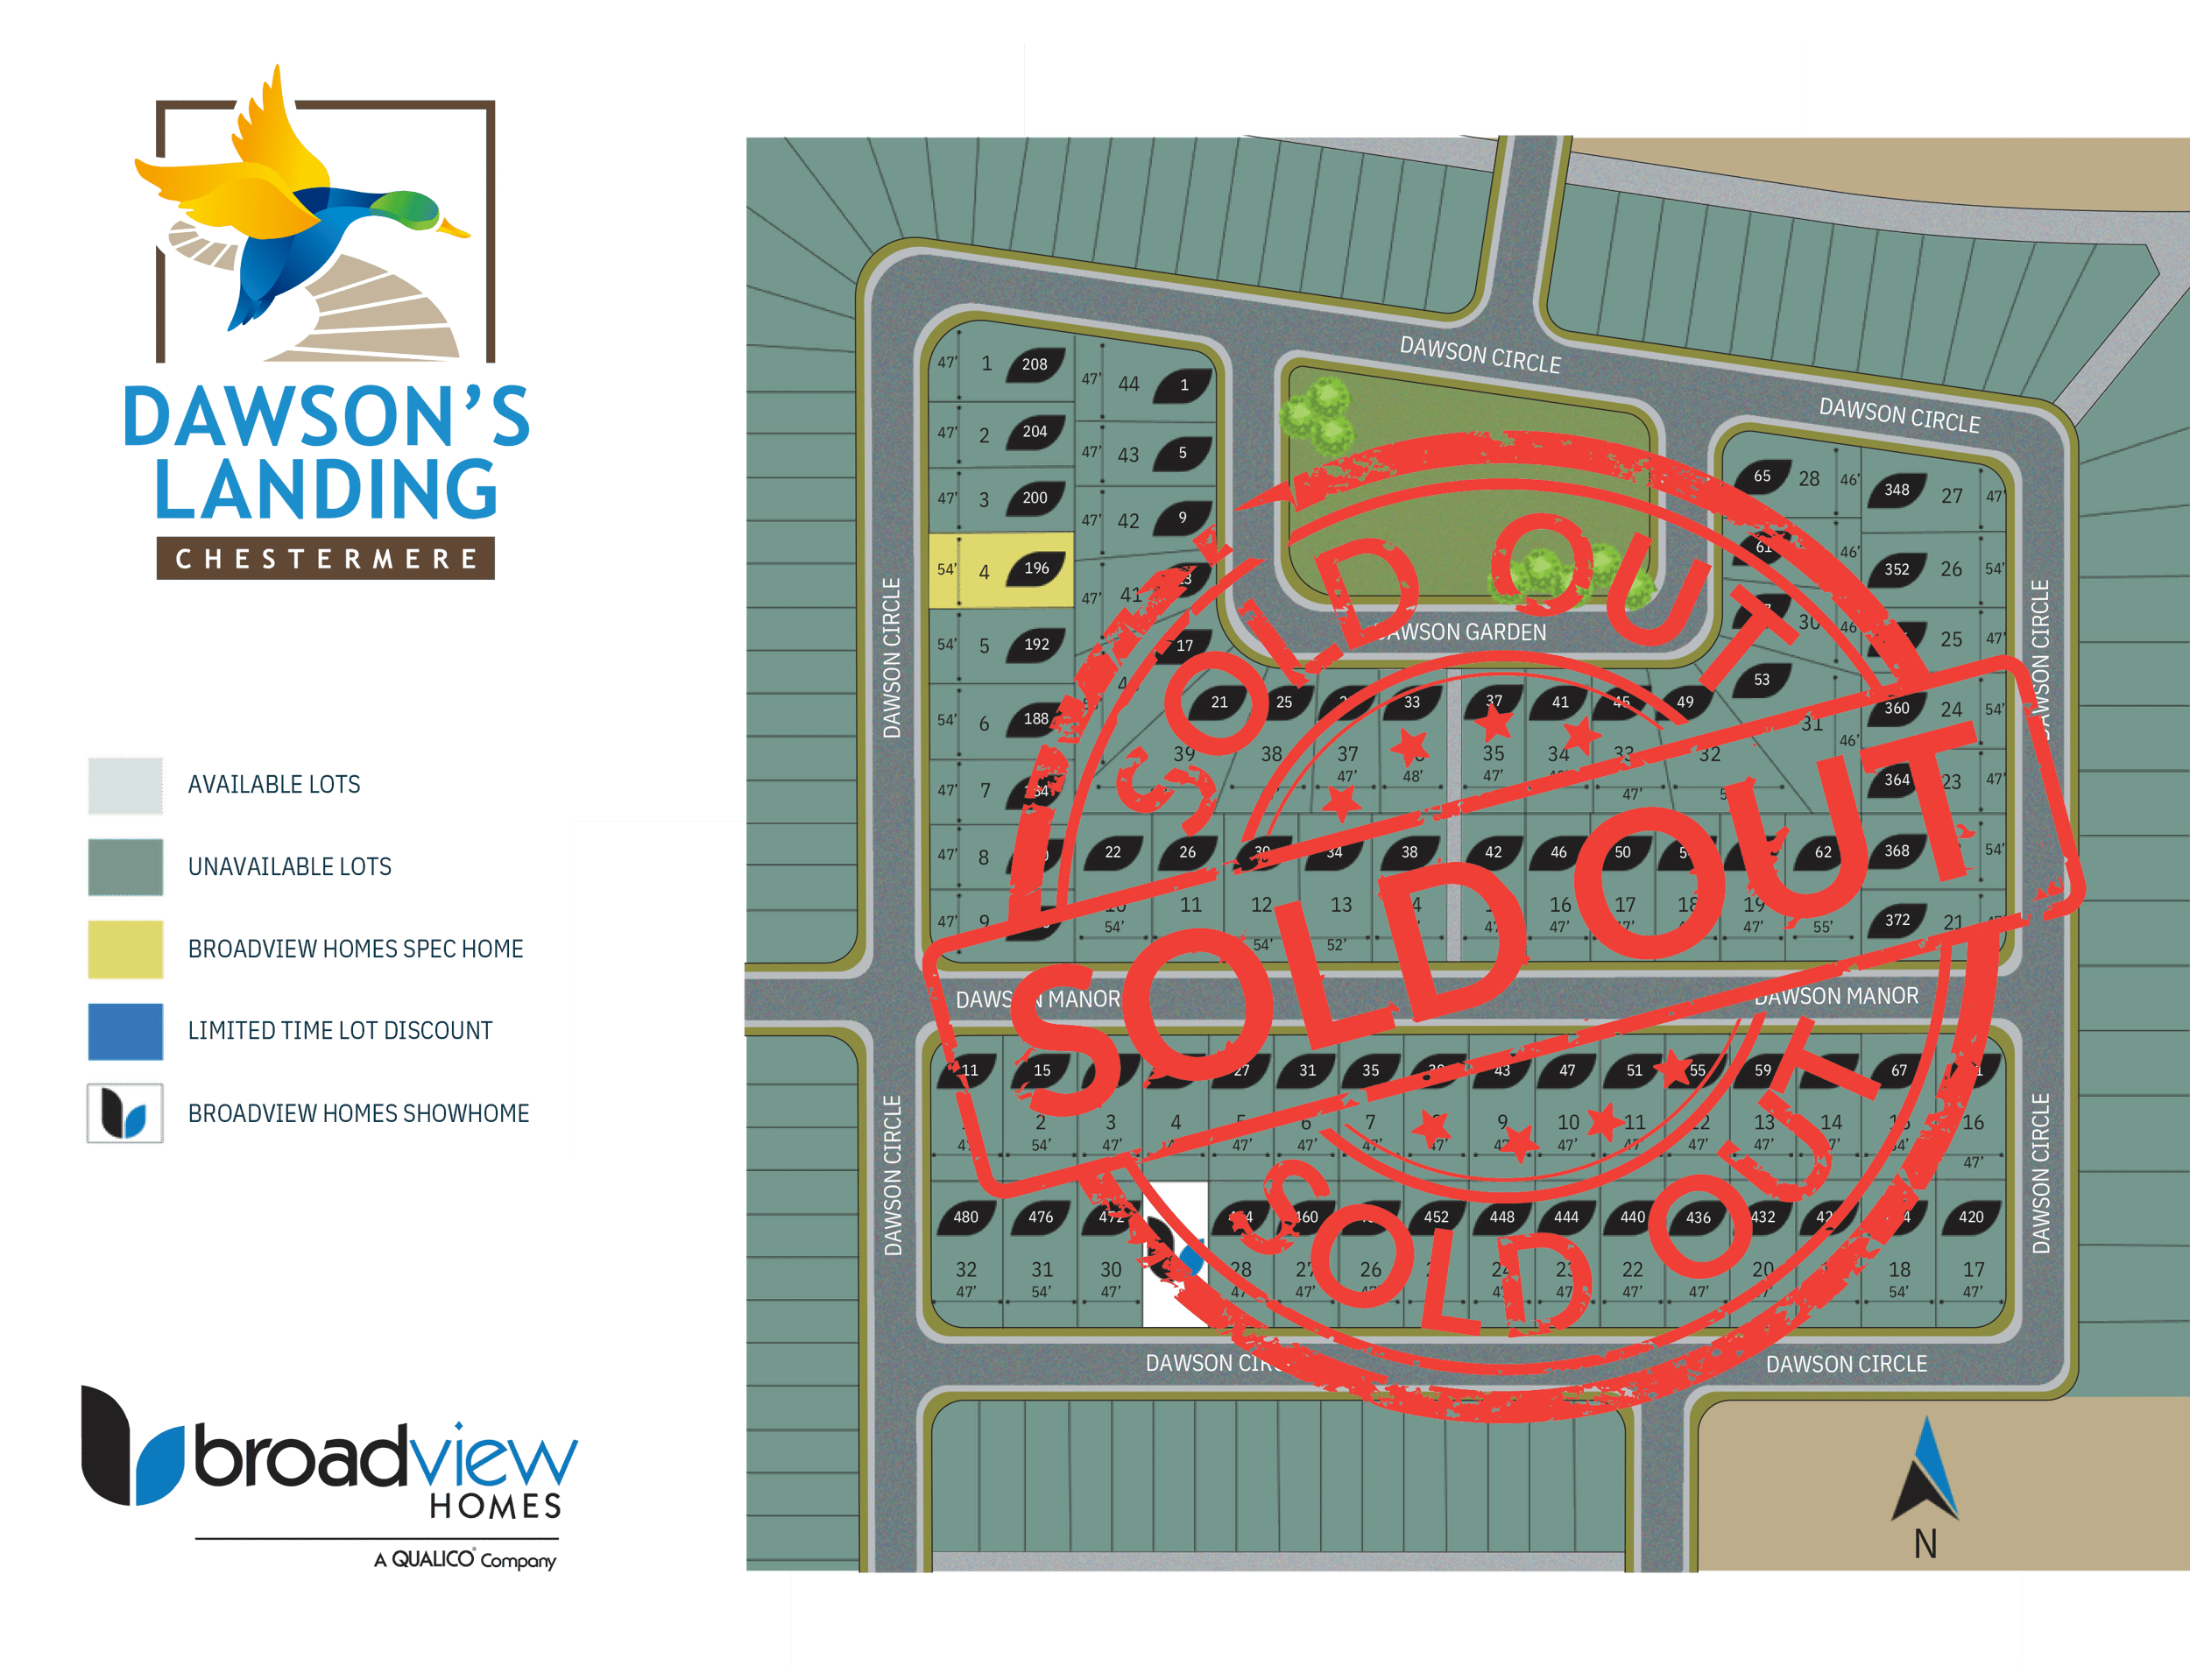 BVH Dawsons landing Community Map Layout - SOLD OUT